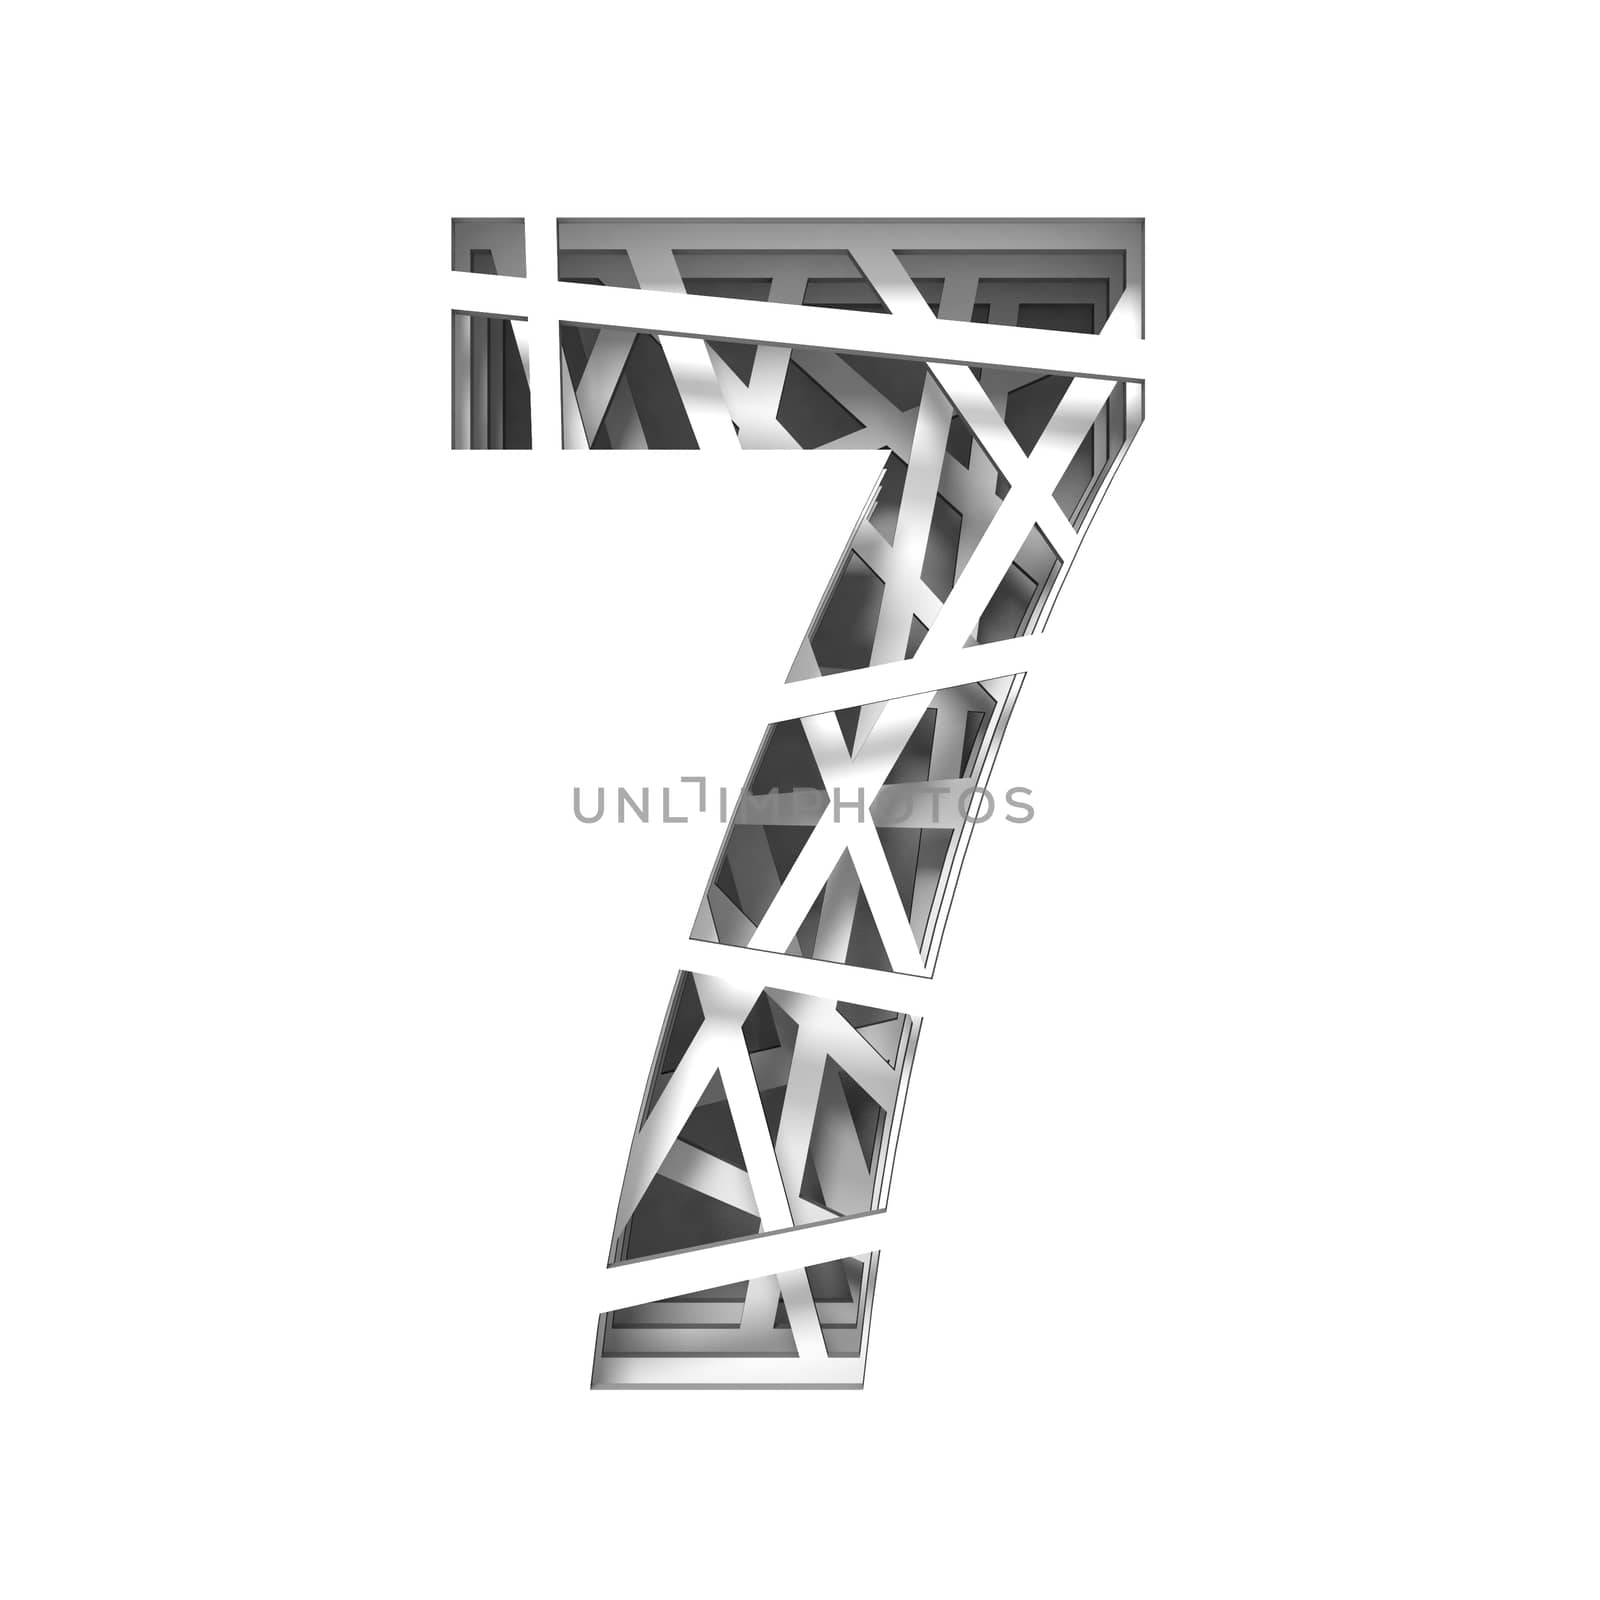 Paper cut out font number SEVEN 7 3D render illustration isolated on white background